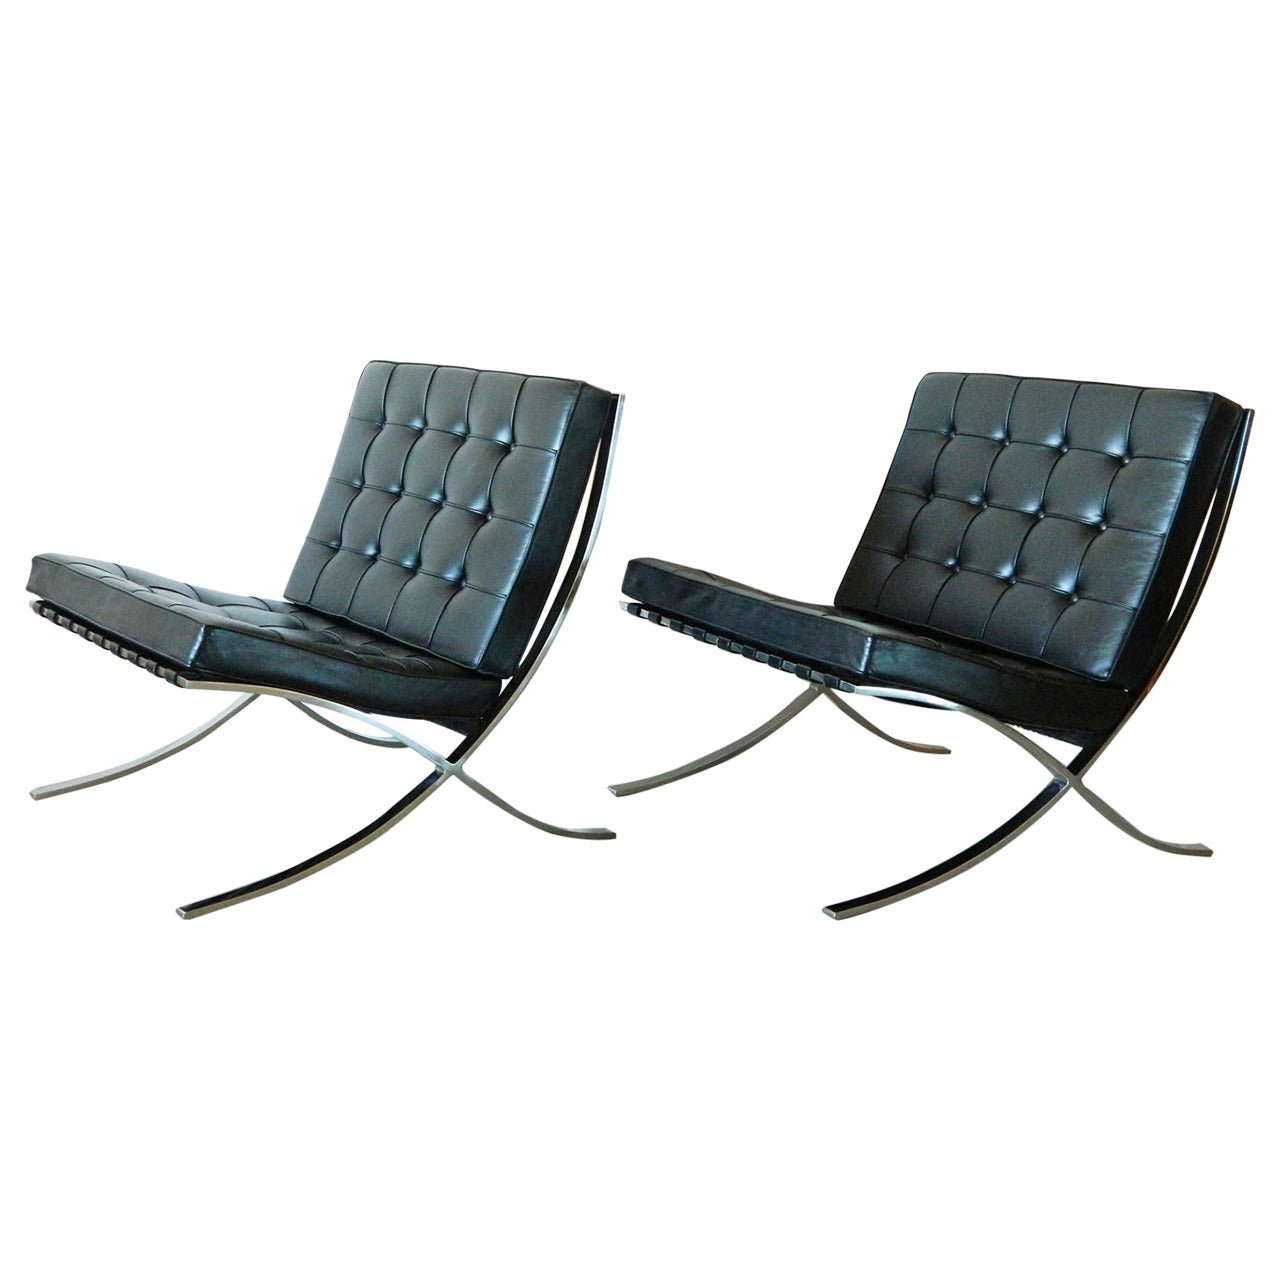 Pair of Vintage Mies van der Rohe Barcelona Chairs for Knoll